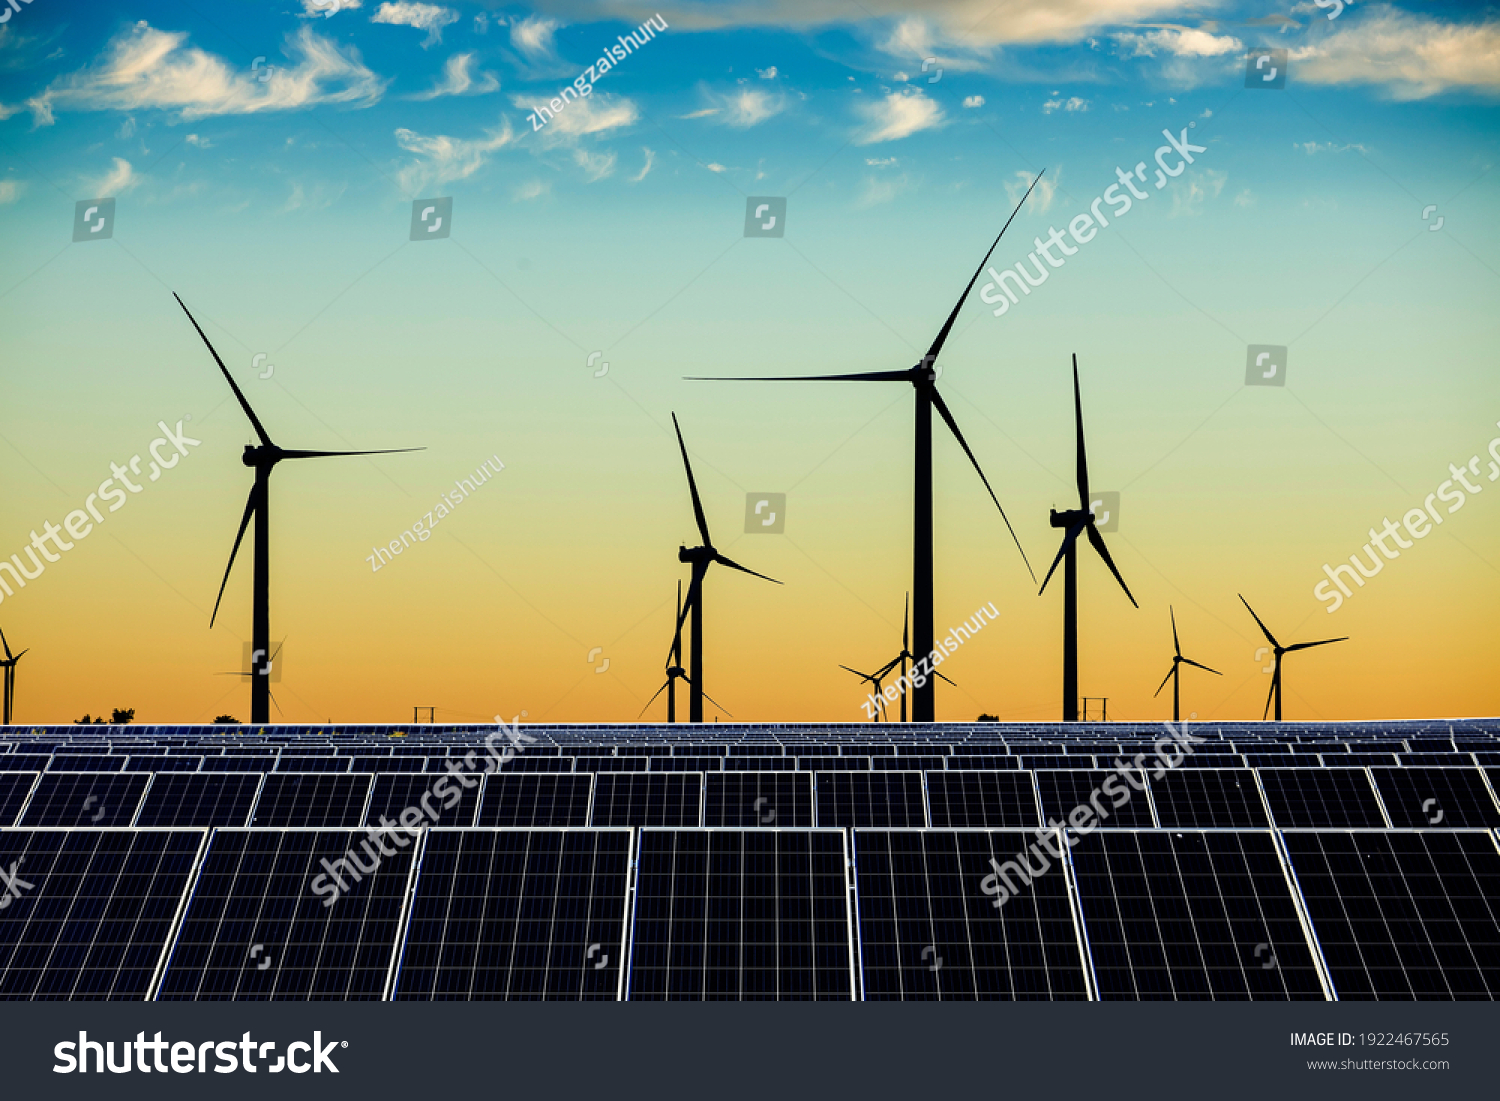 Solar photovoltaic panels and wind turbines. Energy concept #1922467565